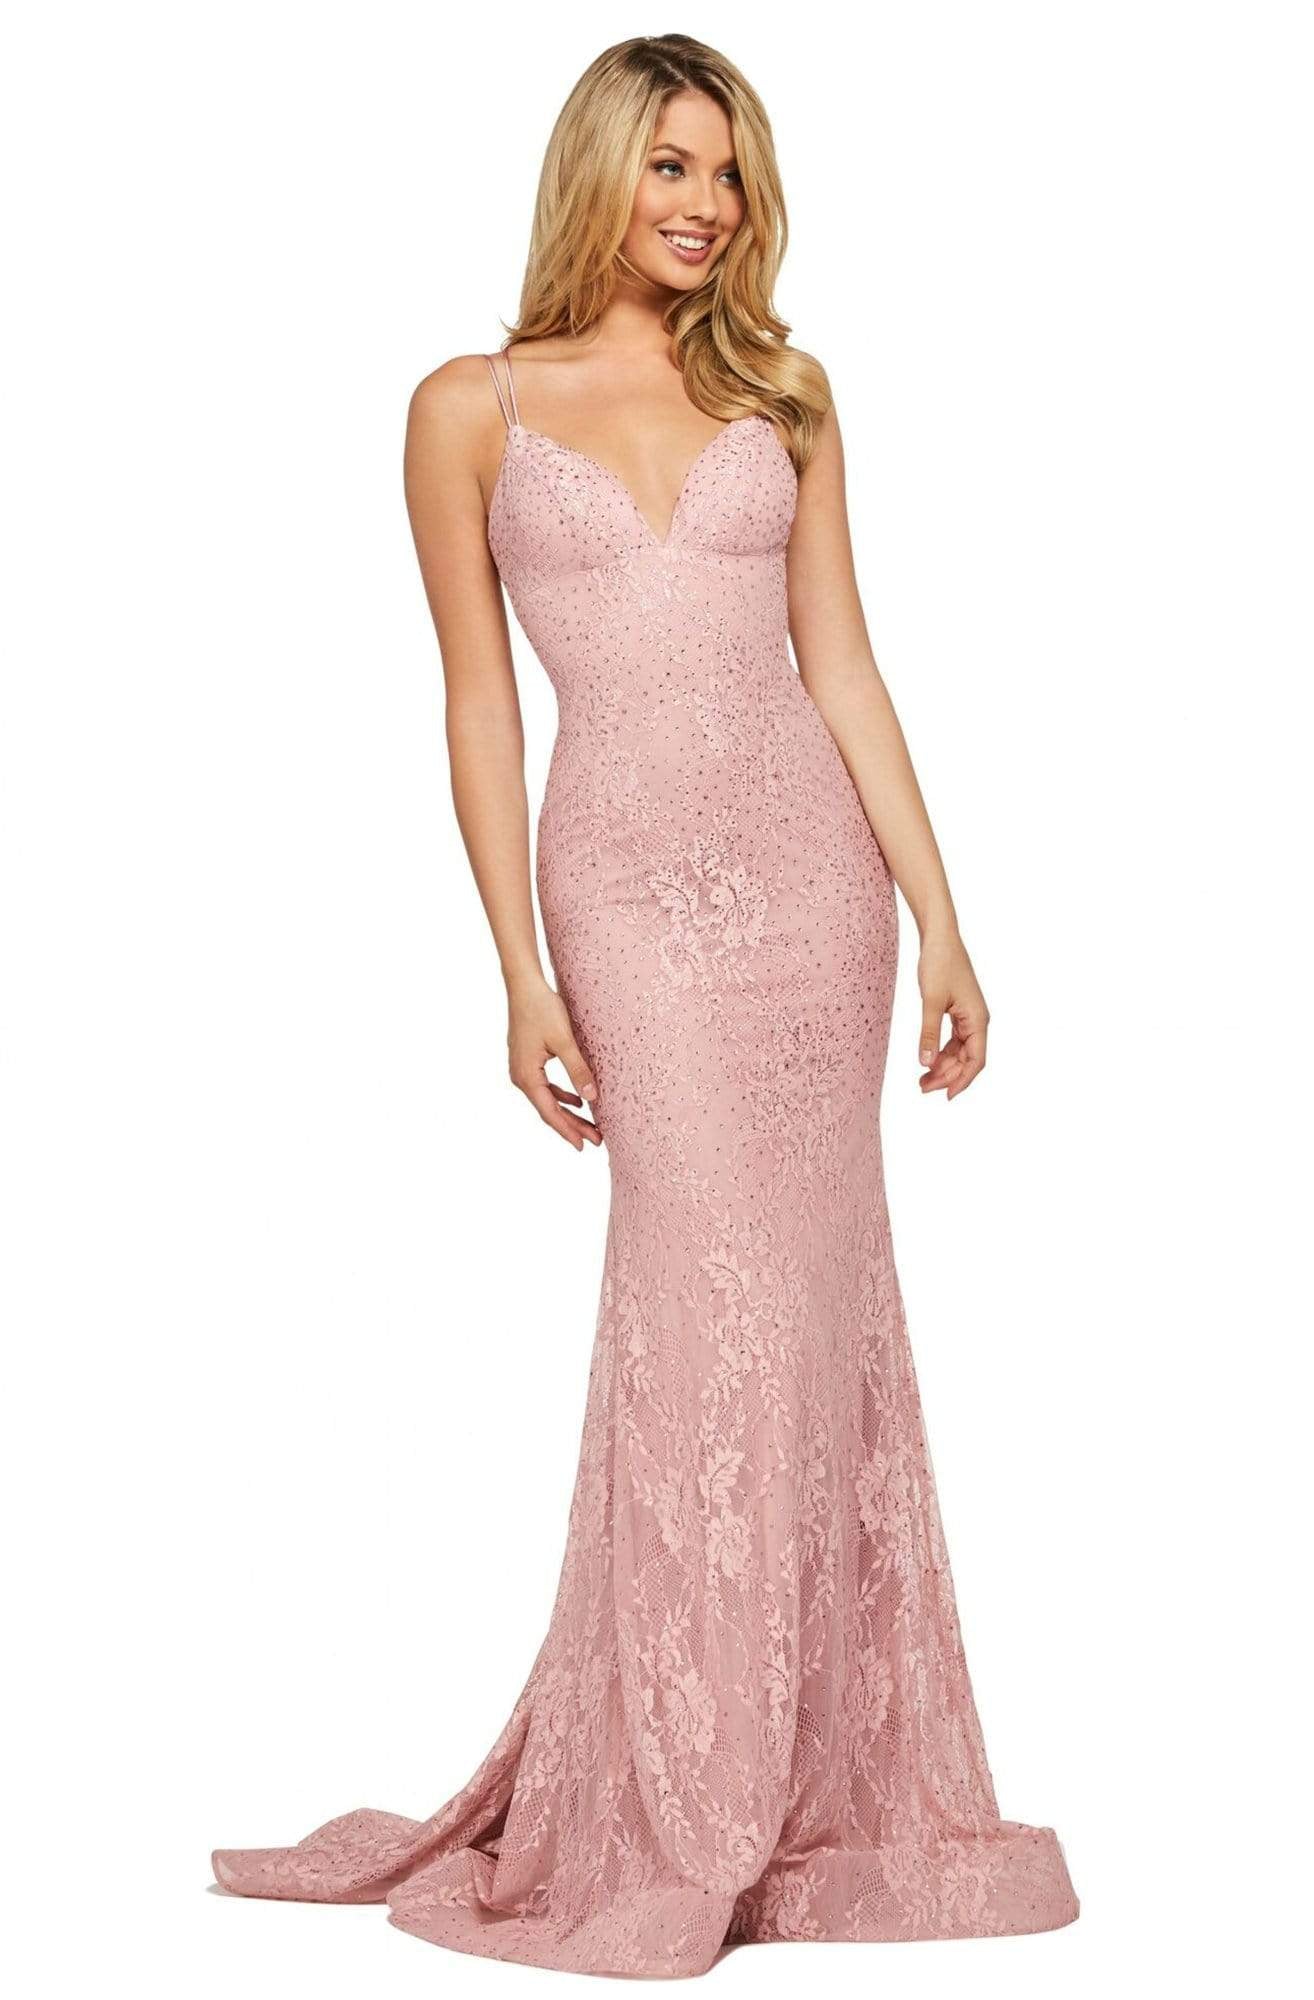 Image of Sherri Hill - 53364 Plunging Lace Up Back Fitted Lace Dress